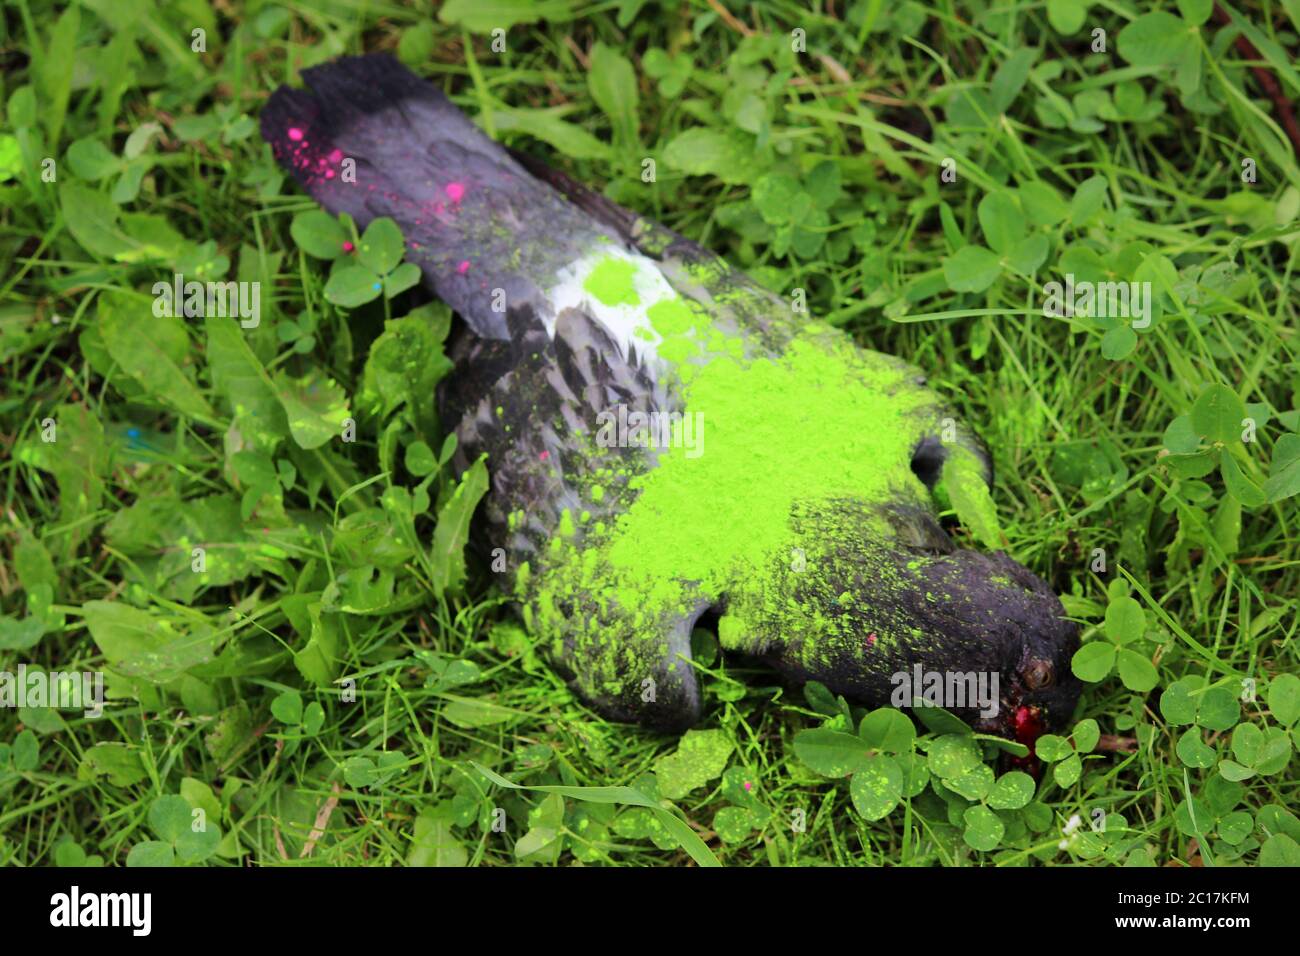 The contrast of the holiday and death. Dead bird pigeon lies on the grass painted with dry green paint at the Holi festival. Stock Photo